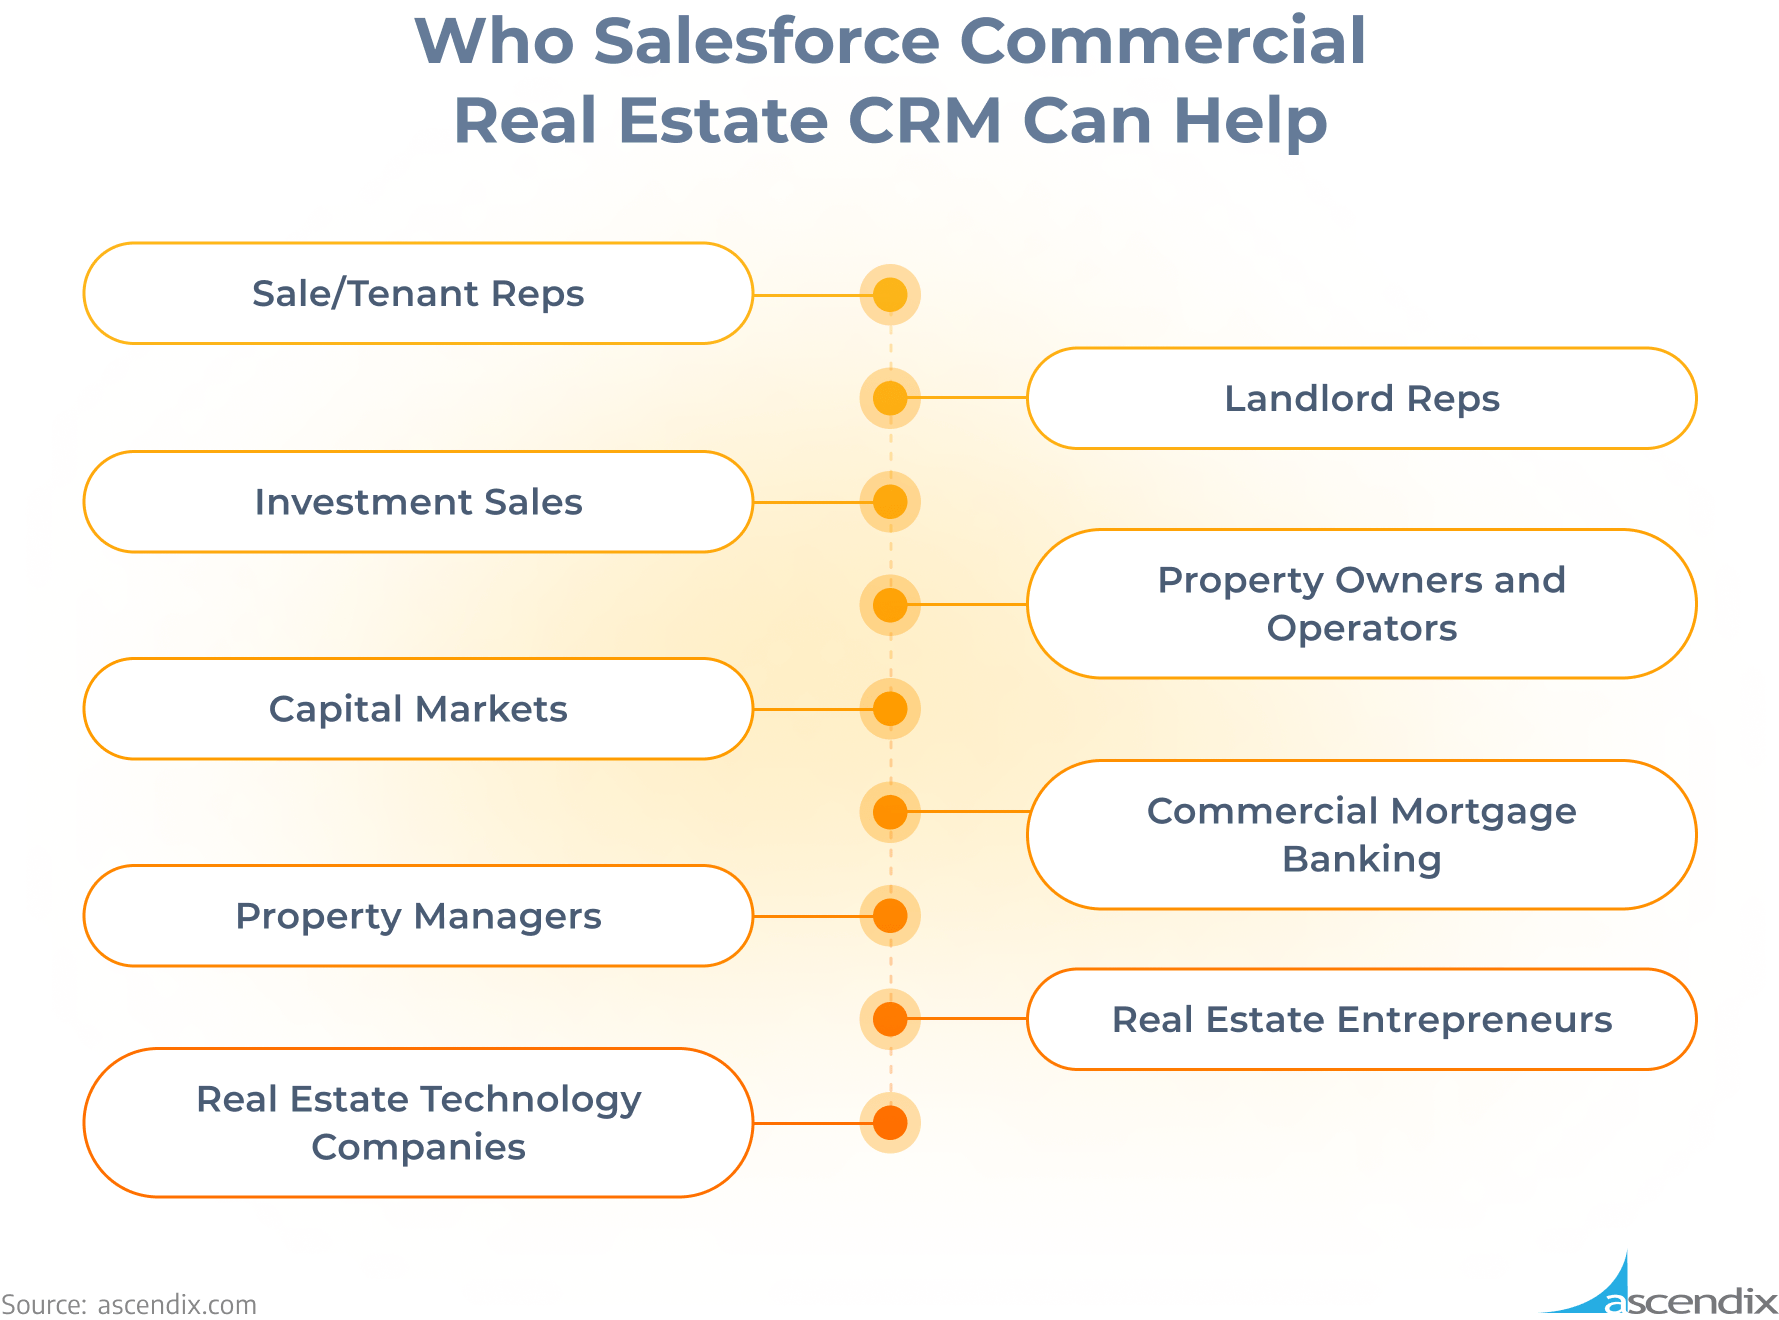 Who Salesforce Commercial Real Estate CRM Can Help | Ascendix